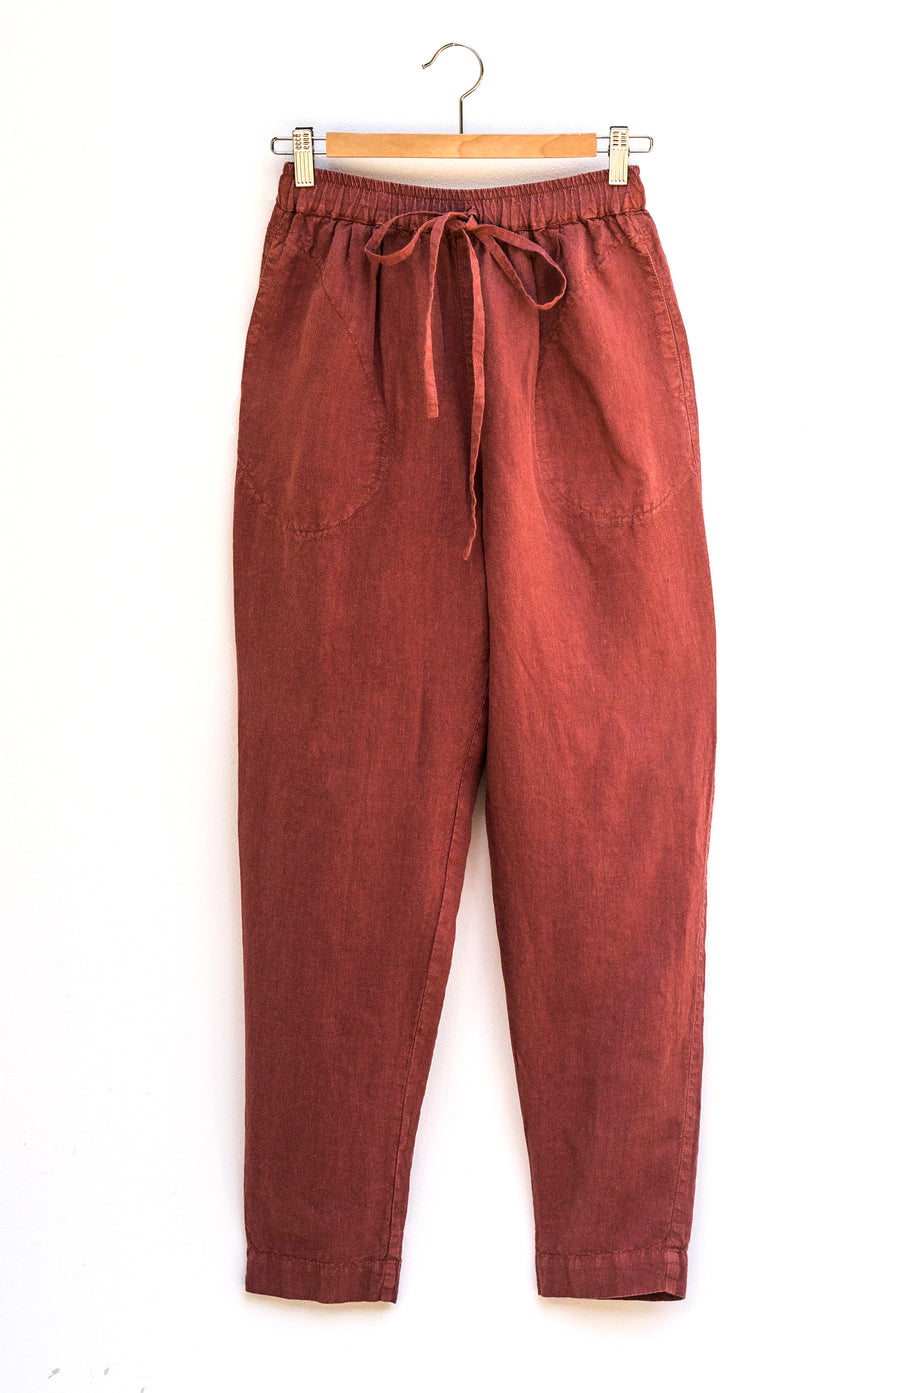 New autumn trousers in the shade of Redwood